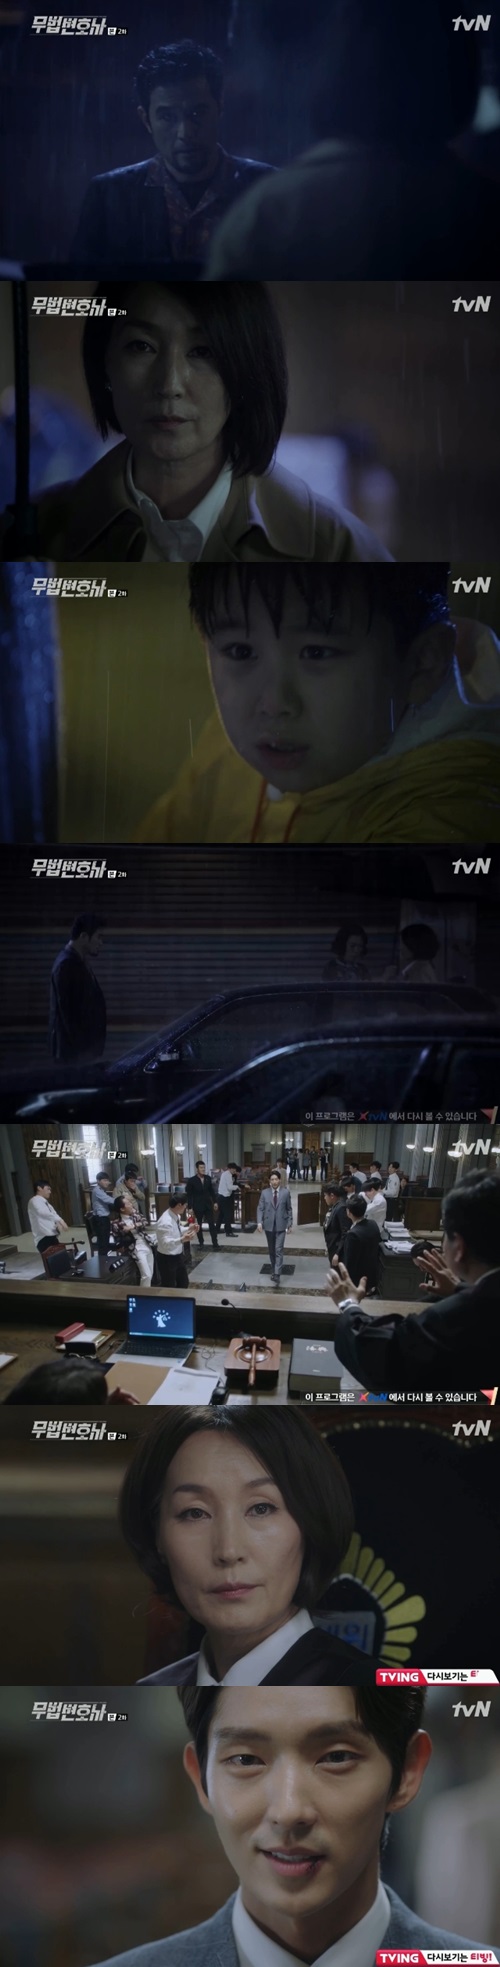 Justice Lee Hye-Yeong was behind the death of Lee Joon-gis mother.In the second episode of TVNs weekend drama Lawless Lawyer, which aired on May 13, the reason why Bong Sang-pil (Lee Joon-gi) watched Cha Moon-sook (Lee Hye-Yeong) was revealed.Bong Sang-pil returned to his hometown to catch Woo Hyung-man (Lee Dae-yeon), who caused his mother, Choi Jin-ae (Shin Eun-jung), to die, and tried to take charge of Woo Hyung-man, who was arrested on charges of killing the established mayor.Woo Hyung-man could not remember Bong Sang-pil at all, and Bong Sang-pil also hired Ha Jae-yi (Seo Ye-ji), who had just been suspended as a lawyer, as my secretary.Woo Hyung-mans lawyer was Ko In-du (played by Jeon Jin-gi), but Bong Sang-pil felt that Woo Hyung-man would be distrusting Ko In-du, and Ha Jae-yi was gradually interested in the case.When Ha Jae-yi asked why he wanted to take the case from Ko In-doo, Bong Sang-pil said it would help promote the case. Ha Jae-yi met Judge Cha Moon-sook, half-doubtedly asking about Bong Sang-pil.Ha Jae-yi admired Judge Cha Moon-sook and sometimes called him Mom. But Nam Soon-ja (Yum Hye-ran), a close associate of Cha Moon-sook, ignored him openly.Nam Soon-ja was a mother of Ha Jae-is high school alumni Kang Yeon-hee (Cha Jung-won), who confronted Ha Jae-yi while slapping the teacher on the grounds that she gave her daughters performance evaluation score during high school.Ha Jae-yi also continued to have conflicts with Kang Yeon-hui, who is now a prosecutor.Cha Moon-sook received media attention once again through volunteer activities, but turned 180 degrees in front of An-oh-ju.Cha Moon-sook promised to push An-oh to the next established market, and An-oh-joo kneeled down as if he had already become a market and bowed, Its a glory.In addition, Cha Moon-sook kicked a goinhead who is roughly proceeding with the trial of Woo Hyung-man and said, What if you change your lawyer?As Cha Moon-sooks concern, Woo Hyung-man changed his lawyer even after he was threatened with murder.Bong Sang-pil revealed that he was the son of Shin Yi Choi Jin-ae and promised to take him out alive, and Woo Hyung-man trusted Bong Sang-pils grudge to tell the truth and left the case to Bong Sang-pil.However, just before the trial, Ha Jae-yi was kidnapped by Seokgwan-dong (Choi Dae-hoon).Seokgwan-dong, who had a grudge against Bong Sang-pil, misunderstood Ha Jae-yi as a lover.Bong Sang-pil asked Tae Kwangsoo (Kim Byung-hee) to make sure that the trial is not going until I come, and went to rescue Ha Jae-yi, and Tae Kwangsoo caused a disturbance in the courtroom and took time.Bong Sang-pil saved Ha Jae-yi and headed to the court, and Ha Jae-yi thanked him when Bong Sang-pil ran for him.On the way, Bong Sang-pil and Ha Jae-yis past relationship were drawn. In the past, Bong Sang-pil was able to escape from the crisis of death with his mother, Choi Jin-ae.Bong Sang-pil knew that and approached Ha Jae-yi intentionally. Bong Sang-pil told Ha Jae-yi meaningfully, This fight will be our fight soon.Yoo Gyeong-sang